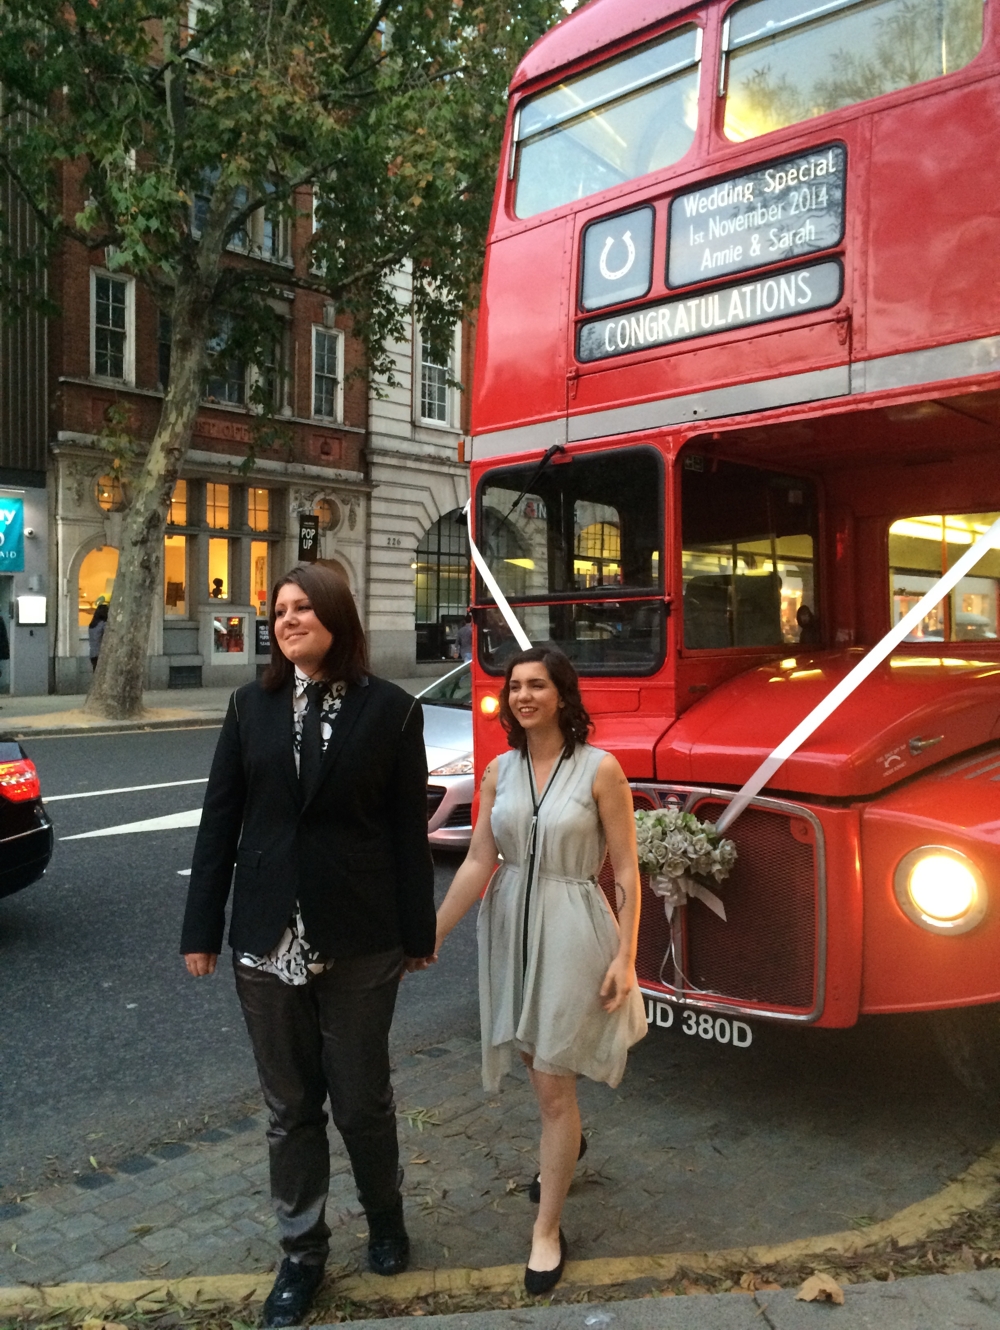 Sarah and Annie standing in front of their wedding bus